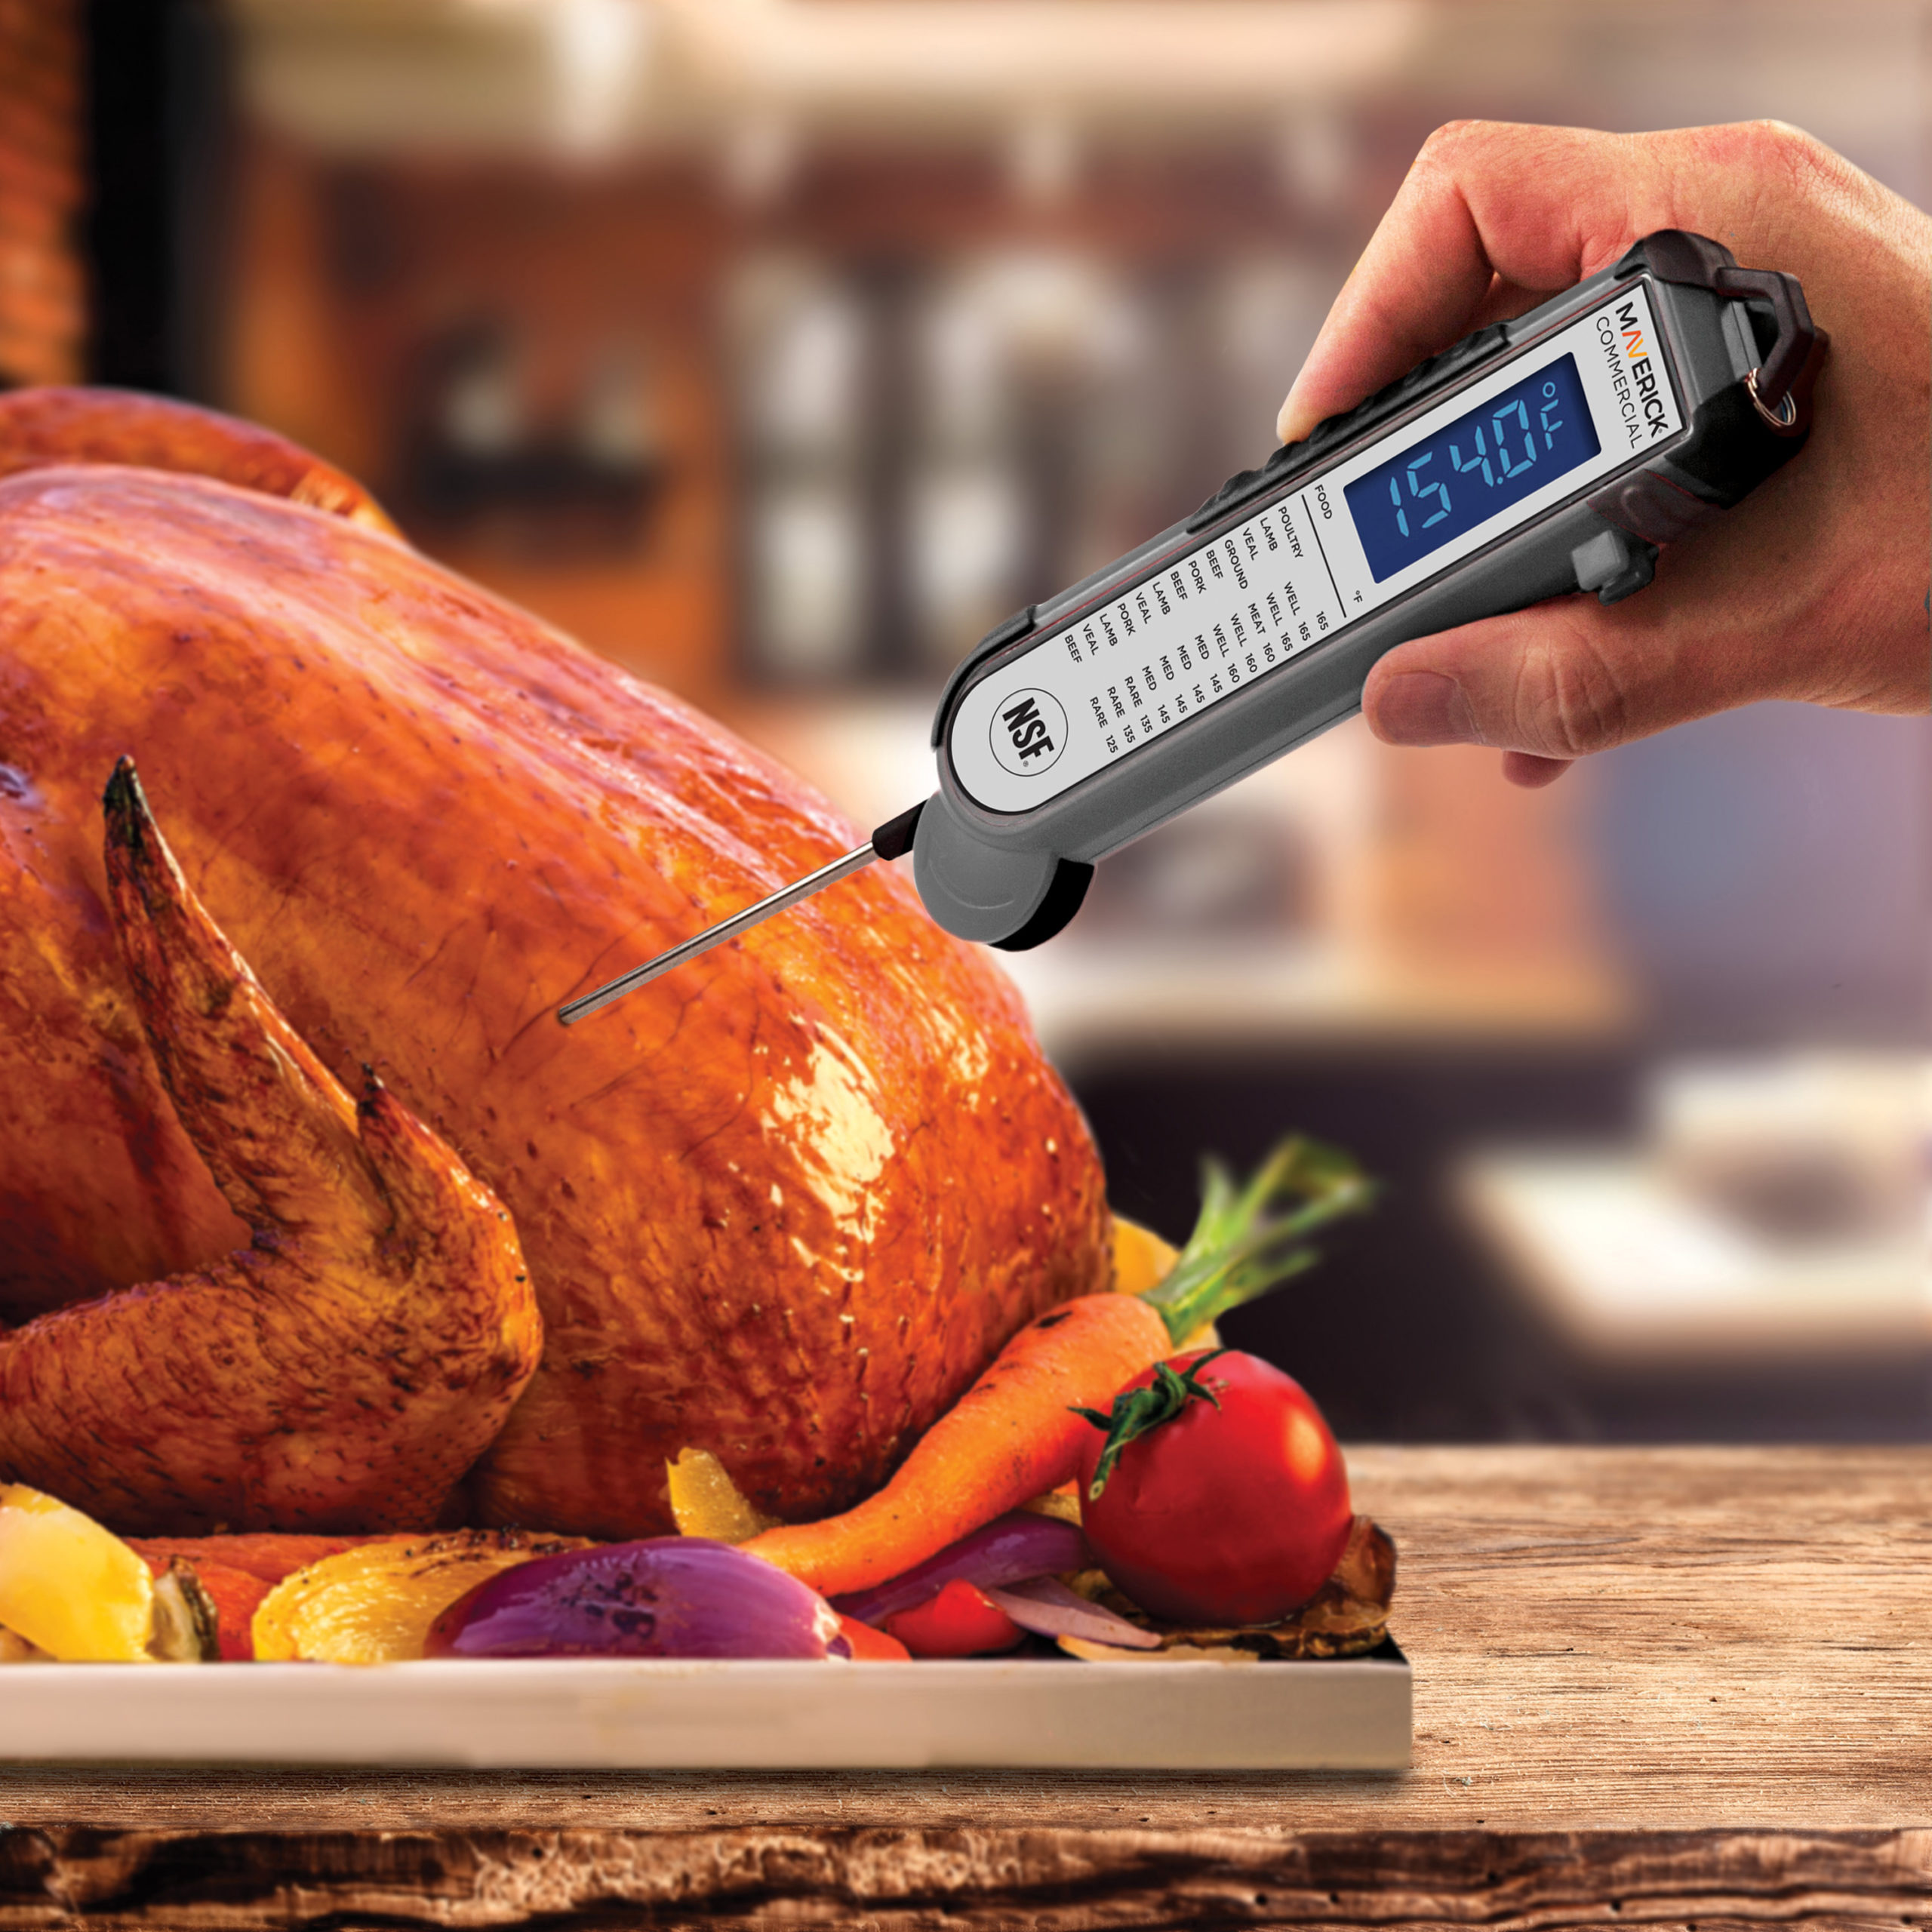  Meat Thermometer Digital Food Thermometer with